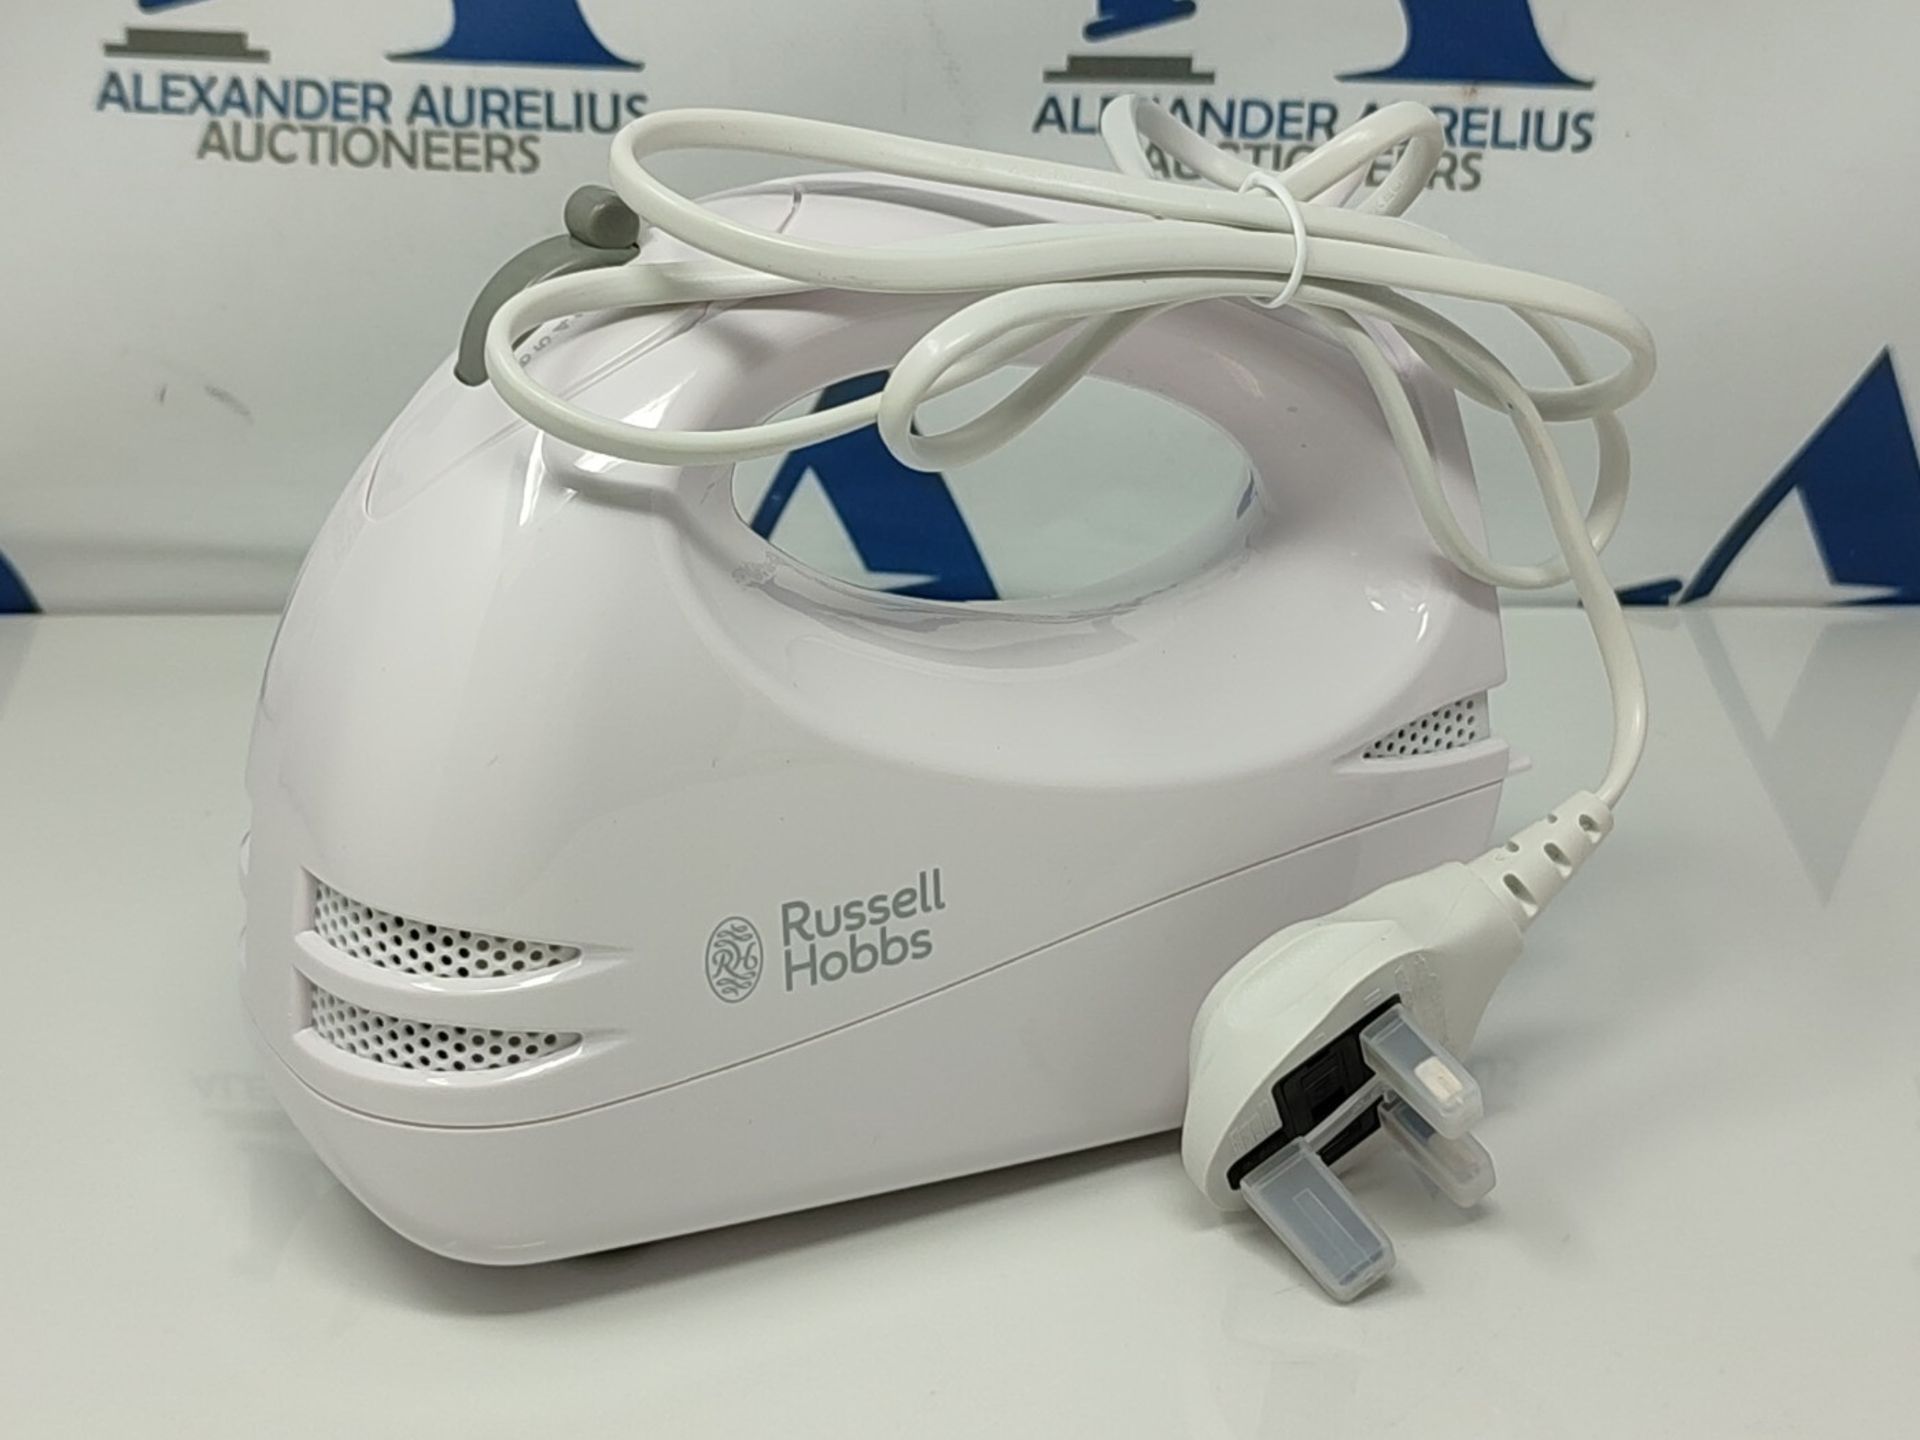 Russell Hobbs Food Collection Hand Mixer with 6 Speed 14451, 125 W - White - Image 3 of 3